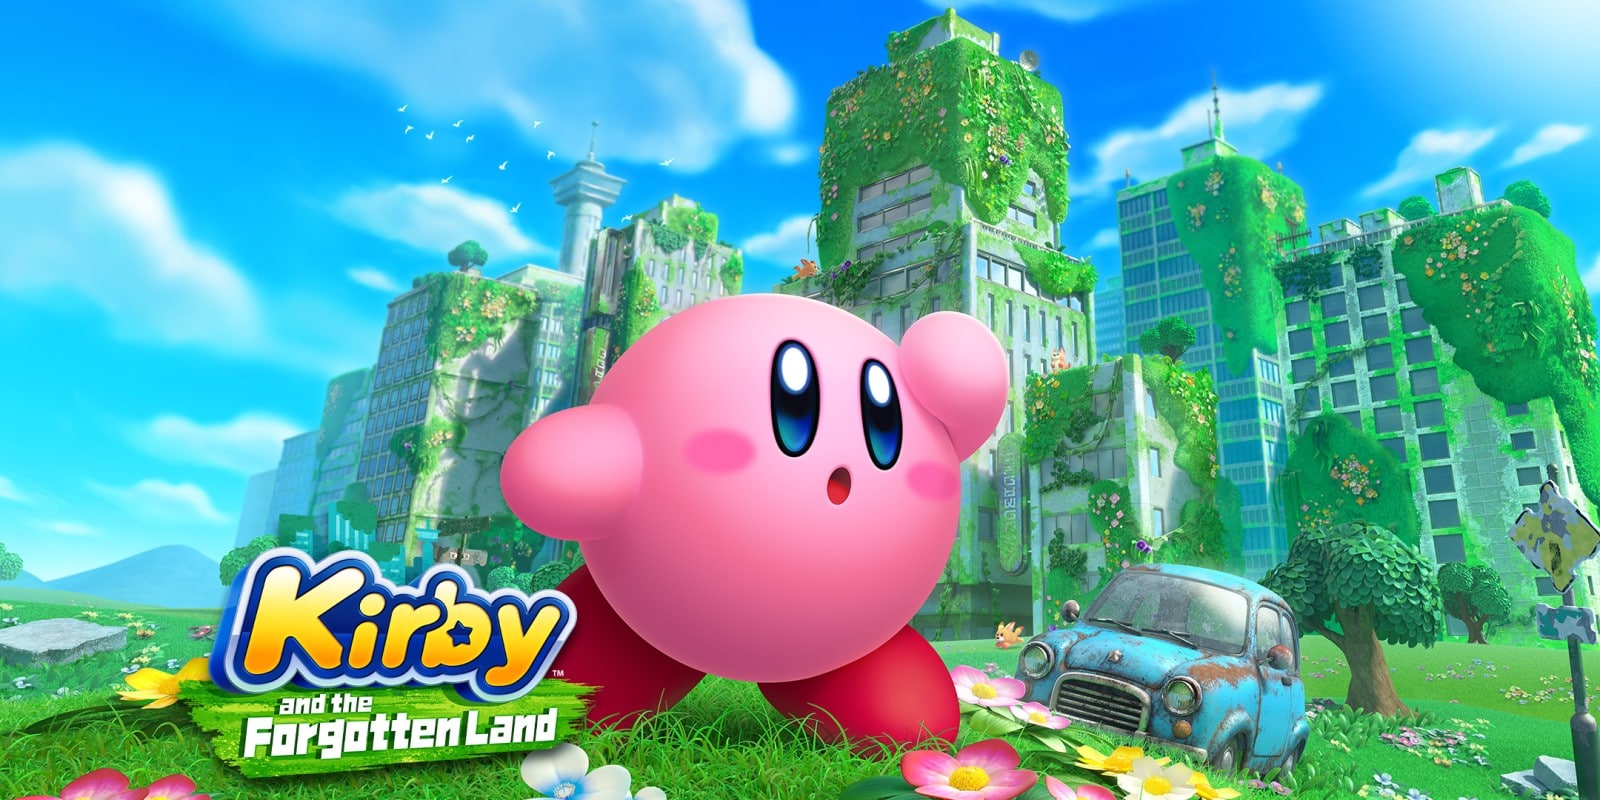 Kirby and the Forgotten Land rated by ESRB